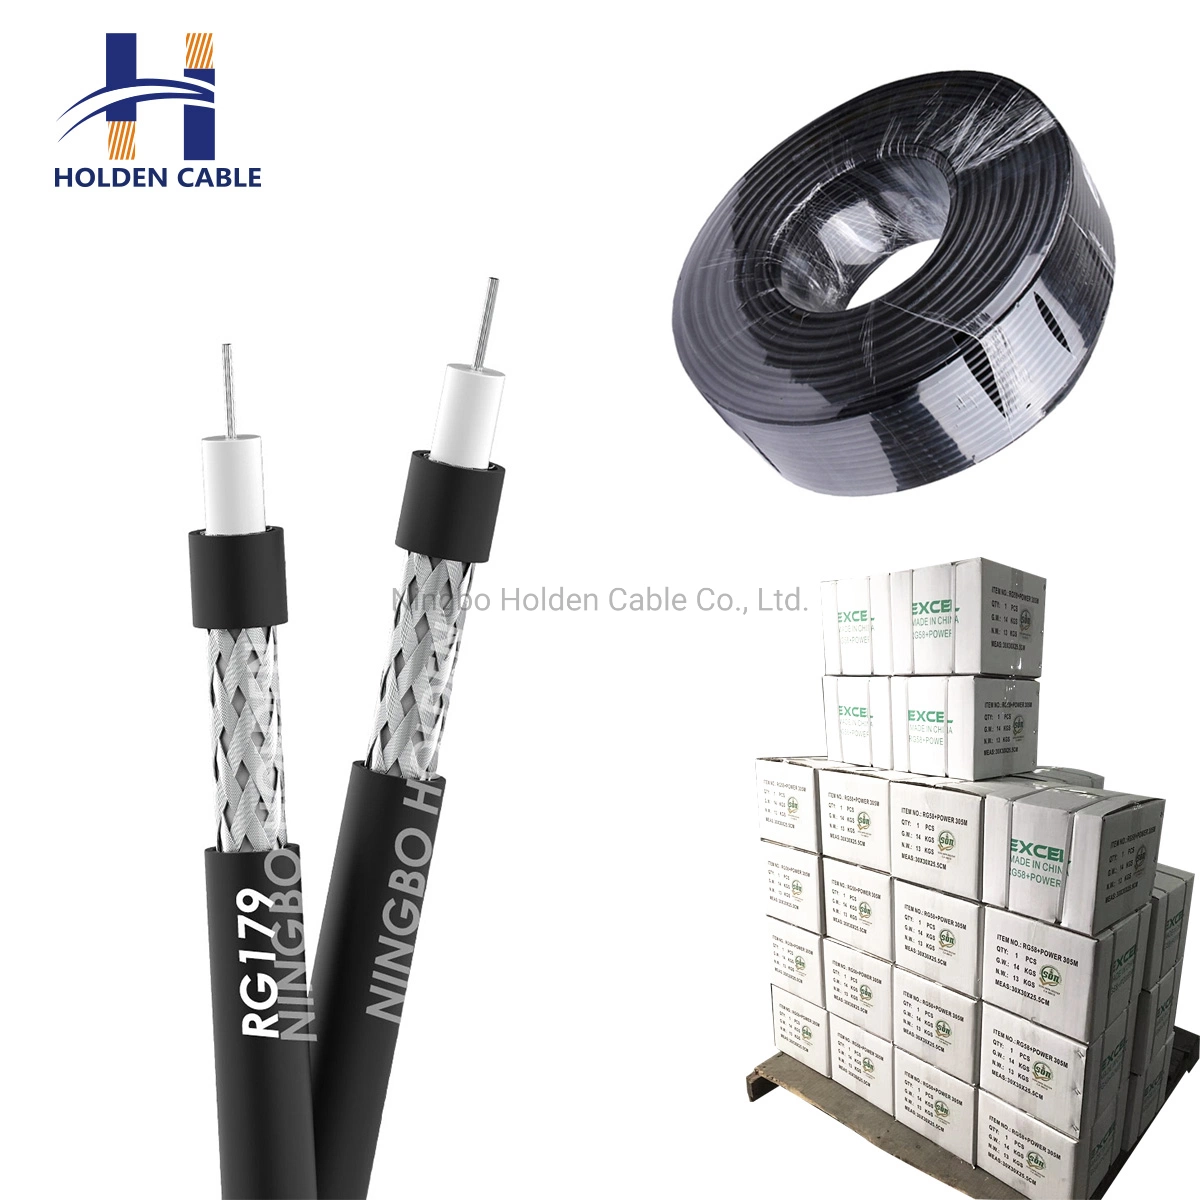 Communication CCTV CATV Cable RG6 Rg59 Coaxial Cable